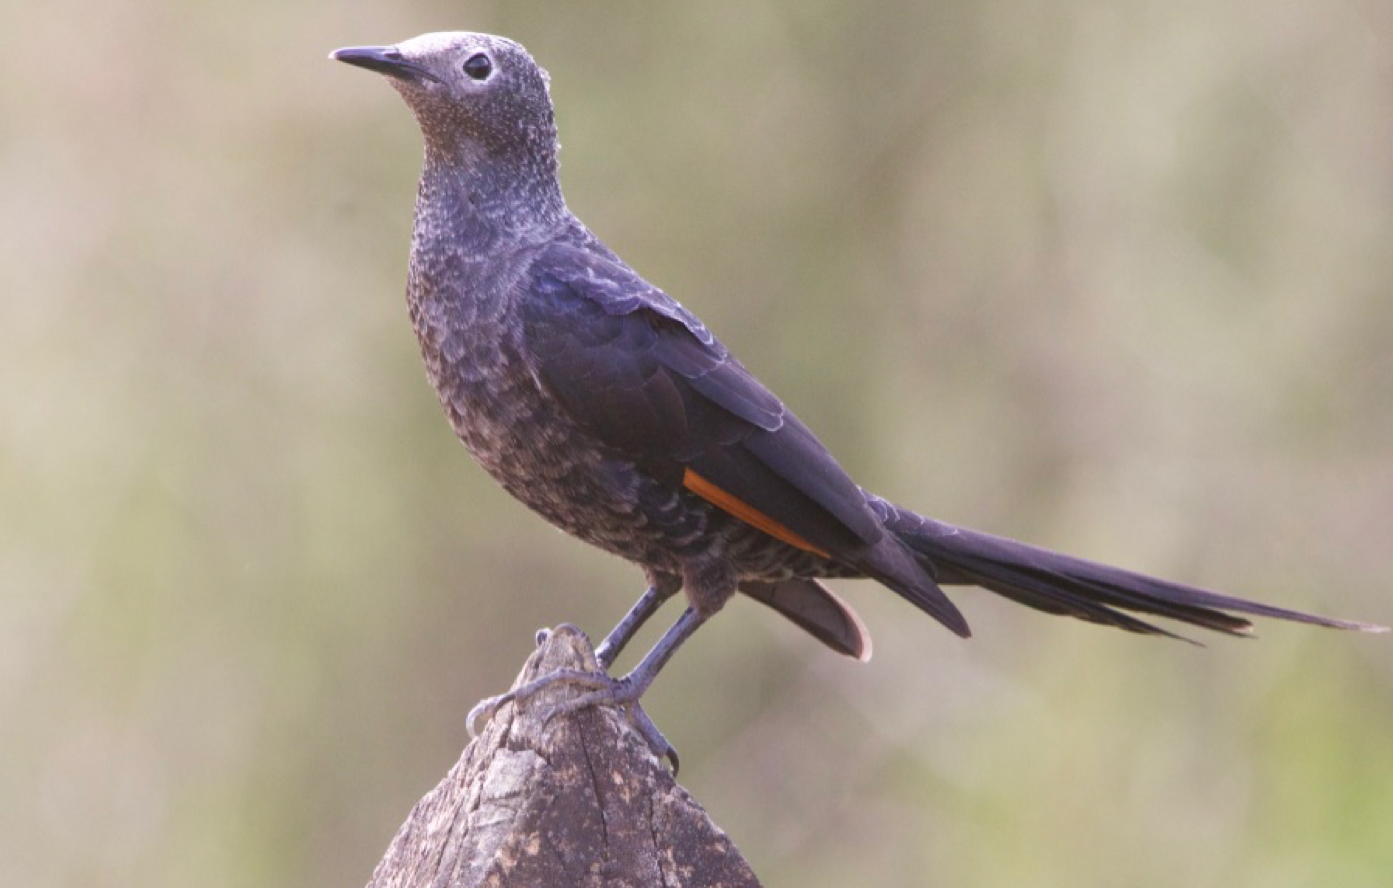 [object object] PHOTOS Slender tailed starling